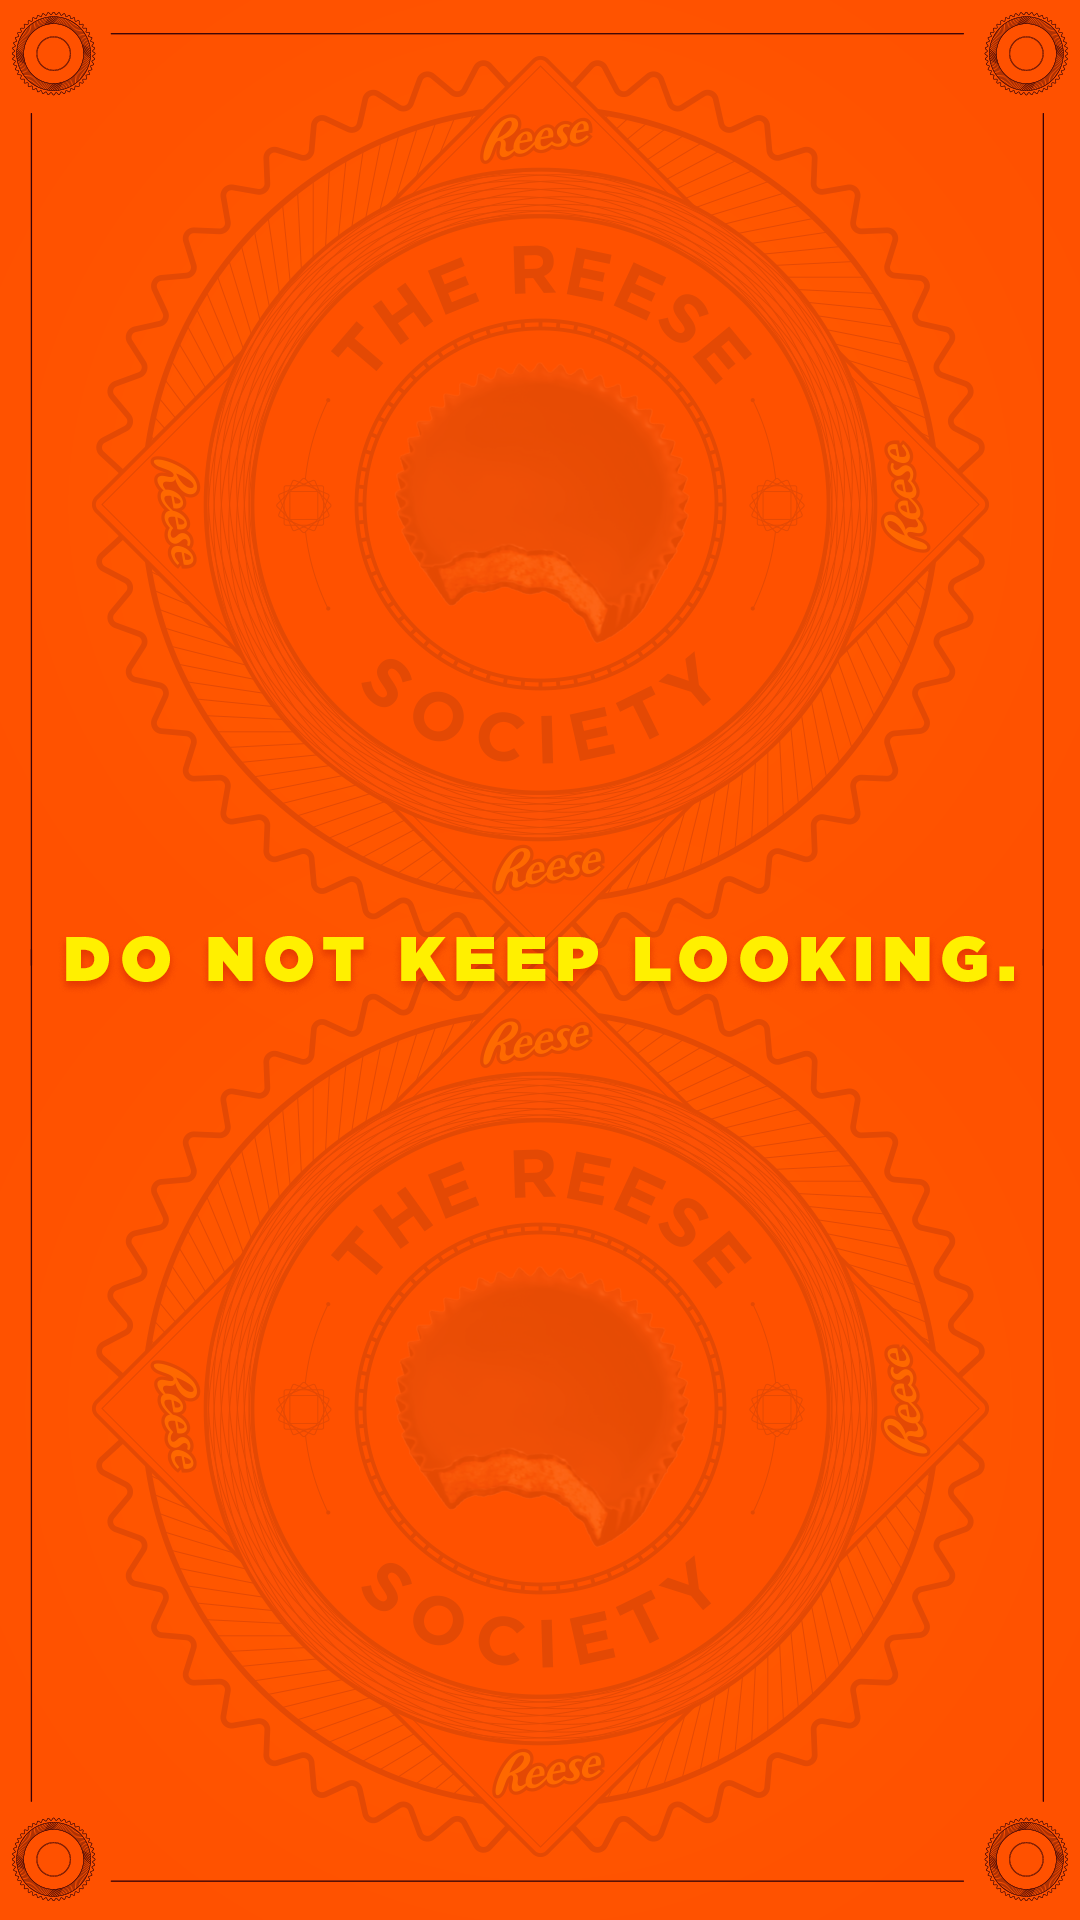 Reese-Society-IG_0081_Do-not-keep-looking.png